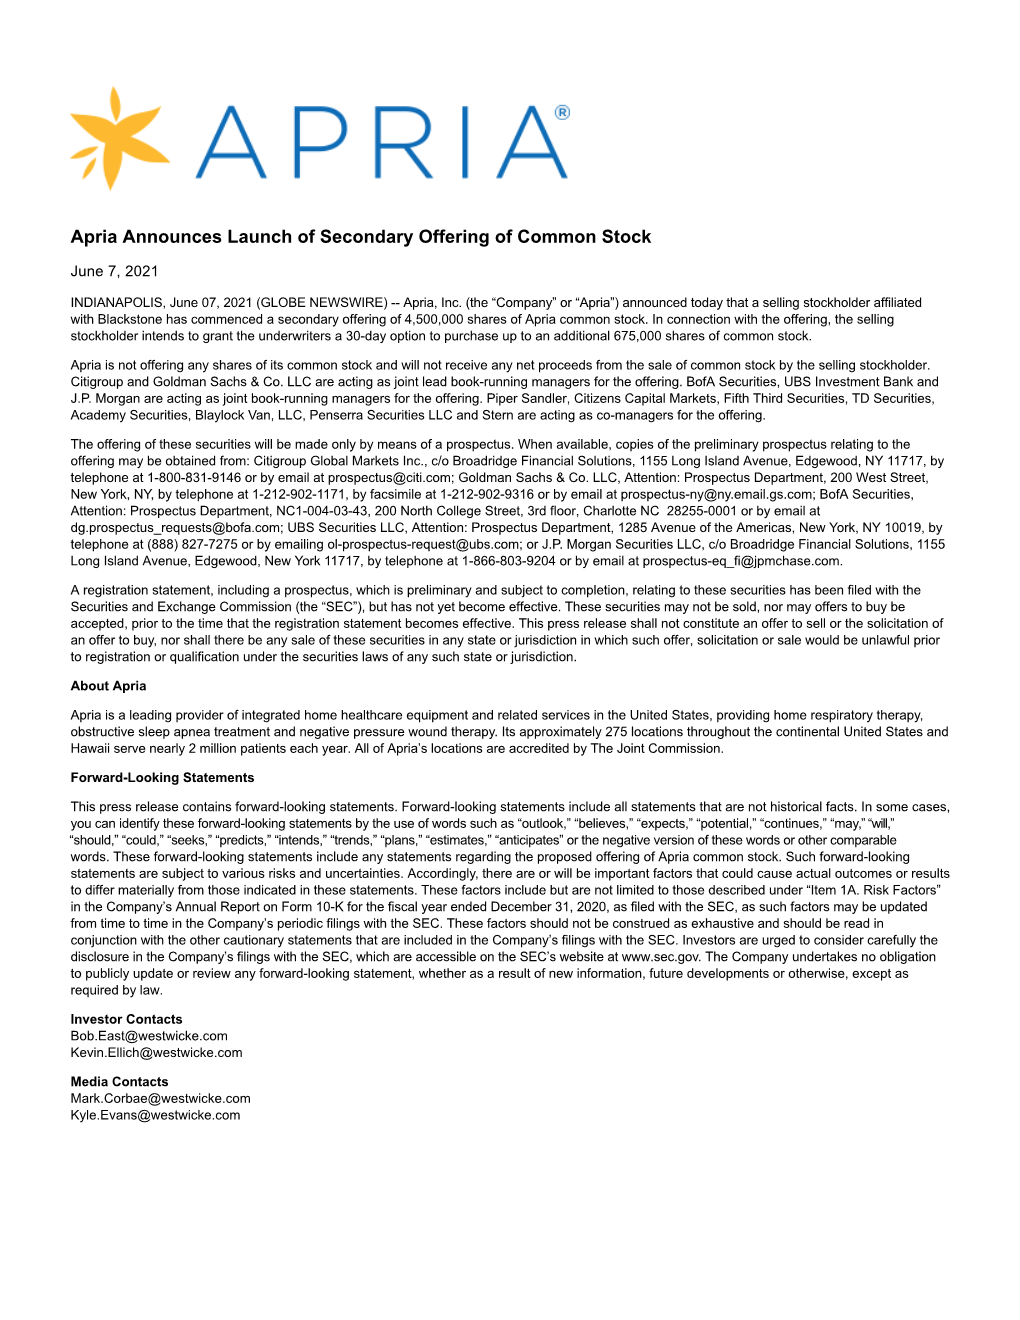 Apria Announces Launch of Secondary Offering of Common Stock